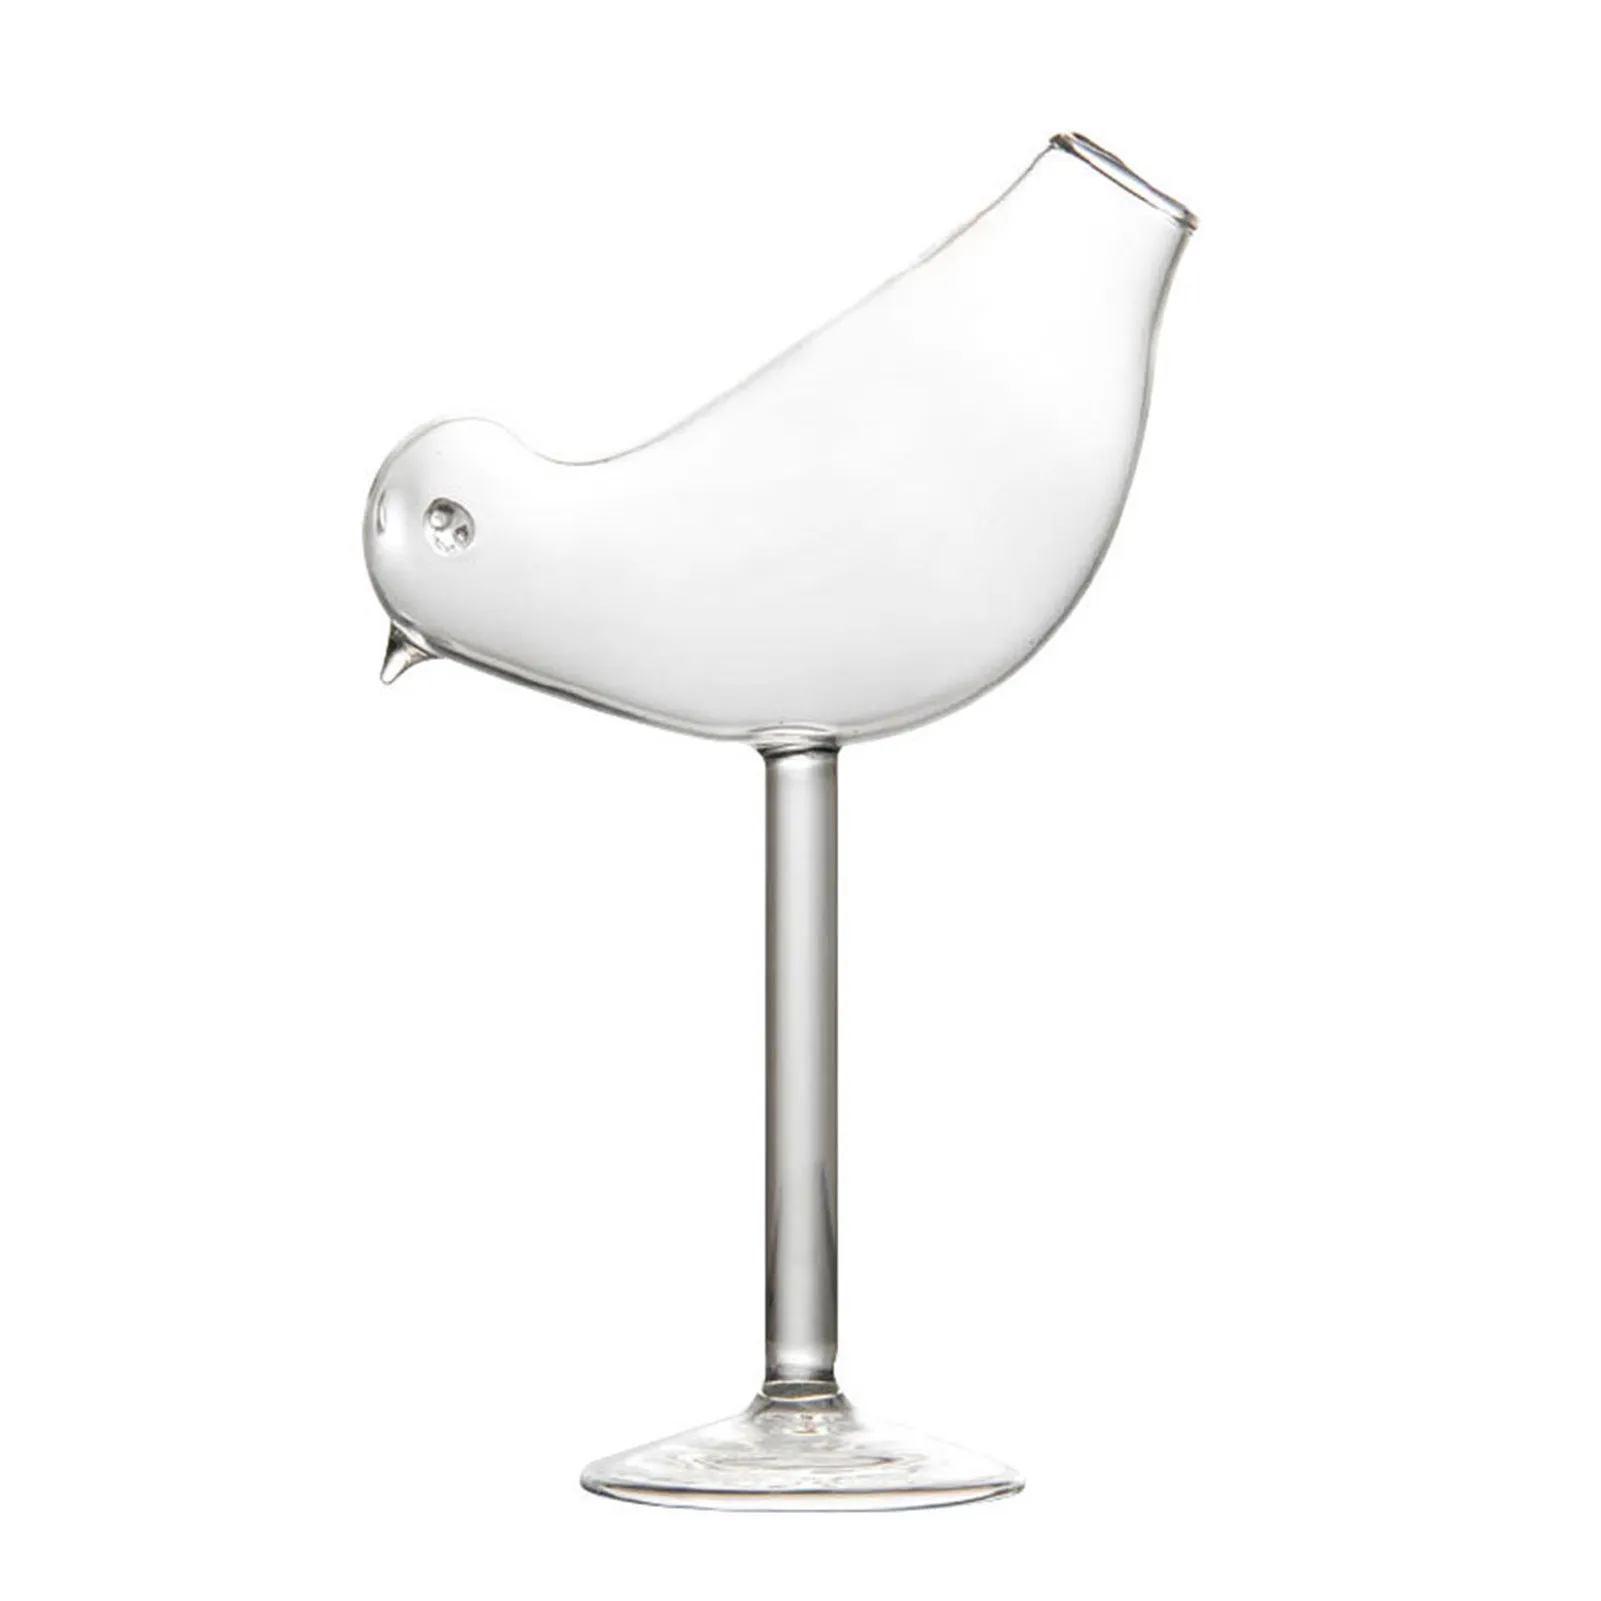 

Cute Bird-shaped Cocktail Glasses Transparent Lead-free High Shed Glass Wine Glass Goblet Whiskey Beer Drinking Cup Gently